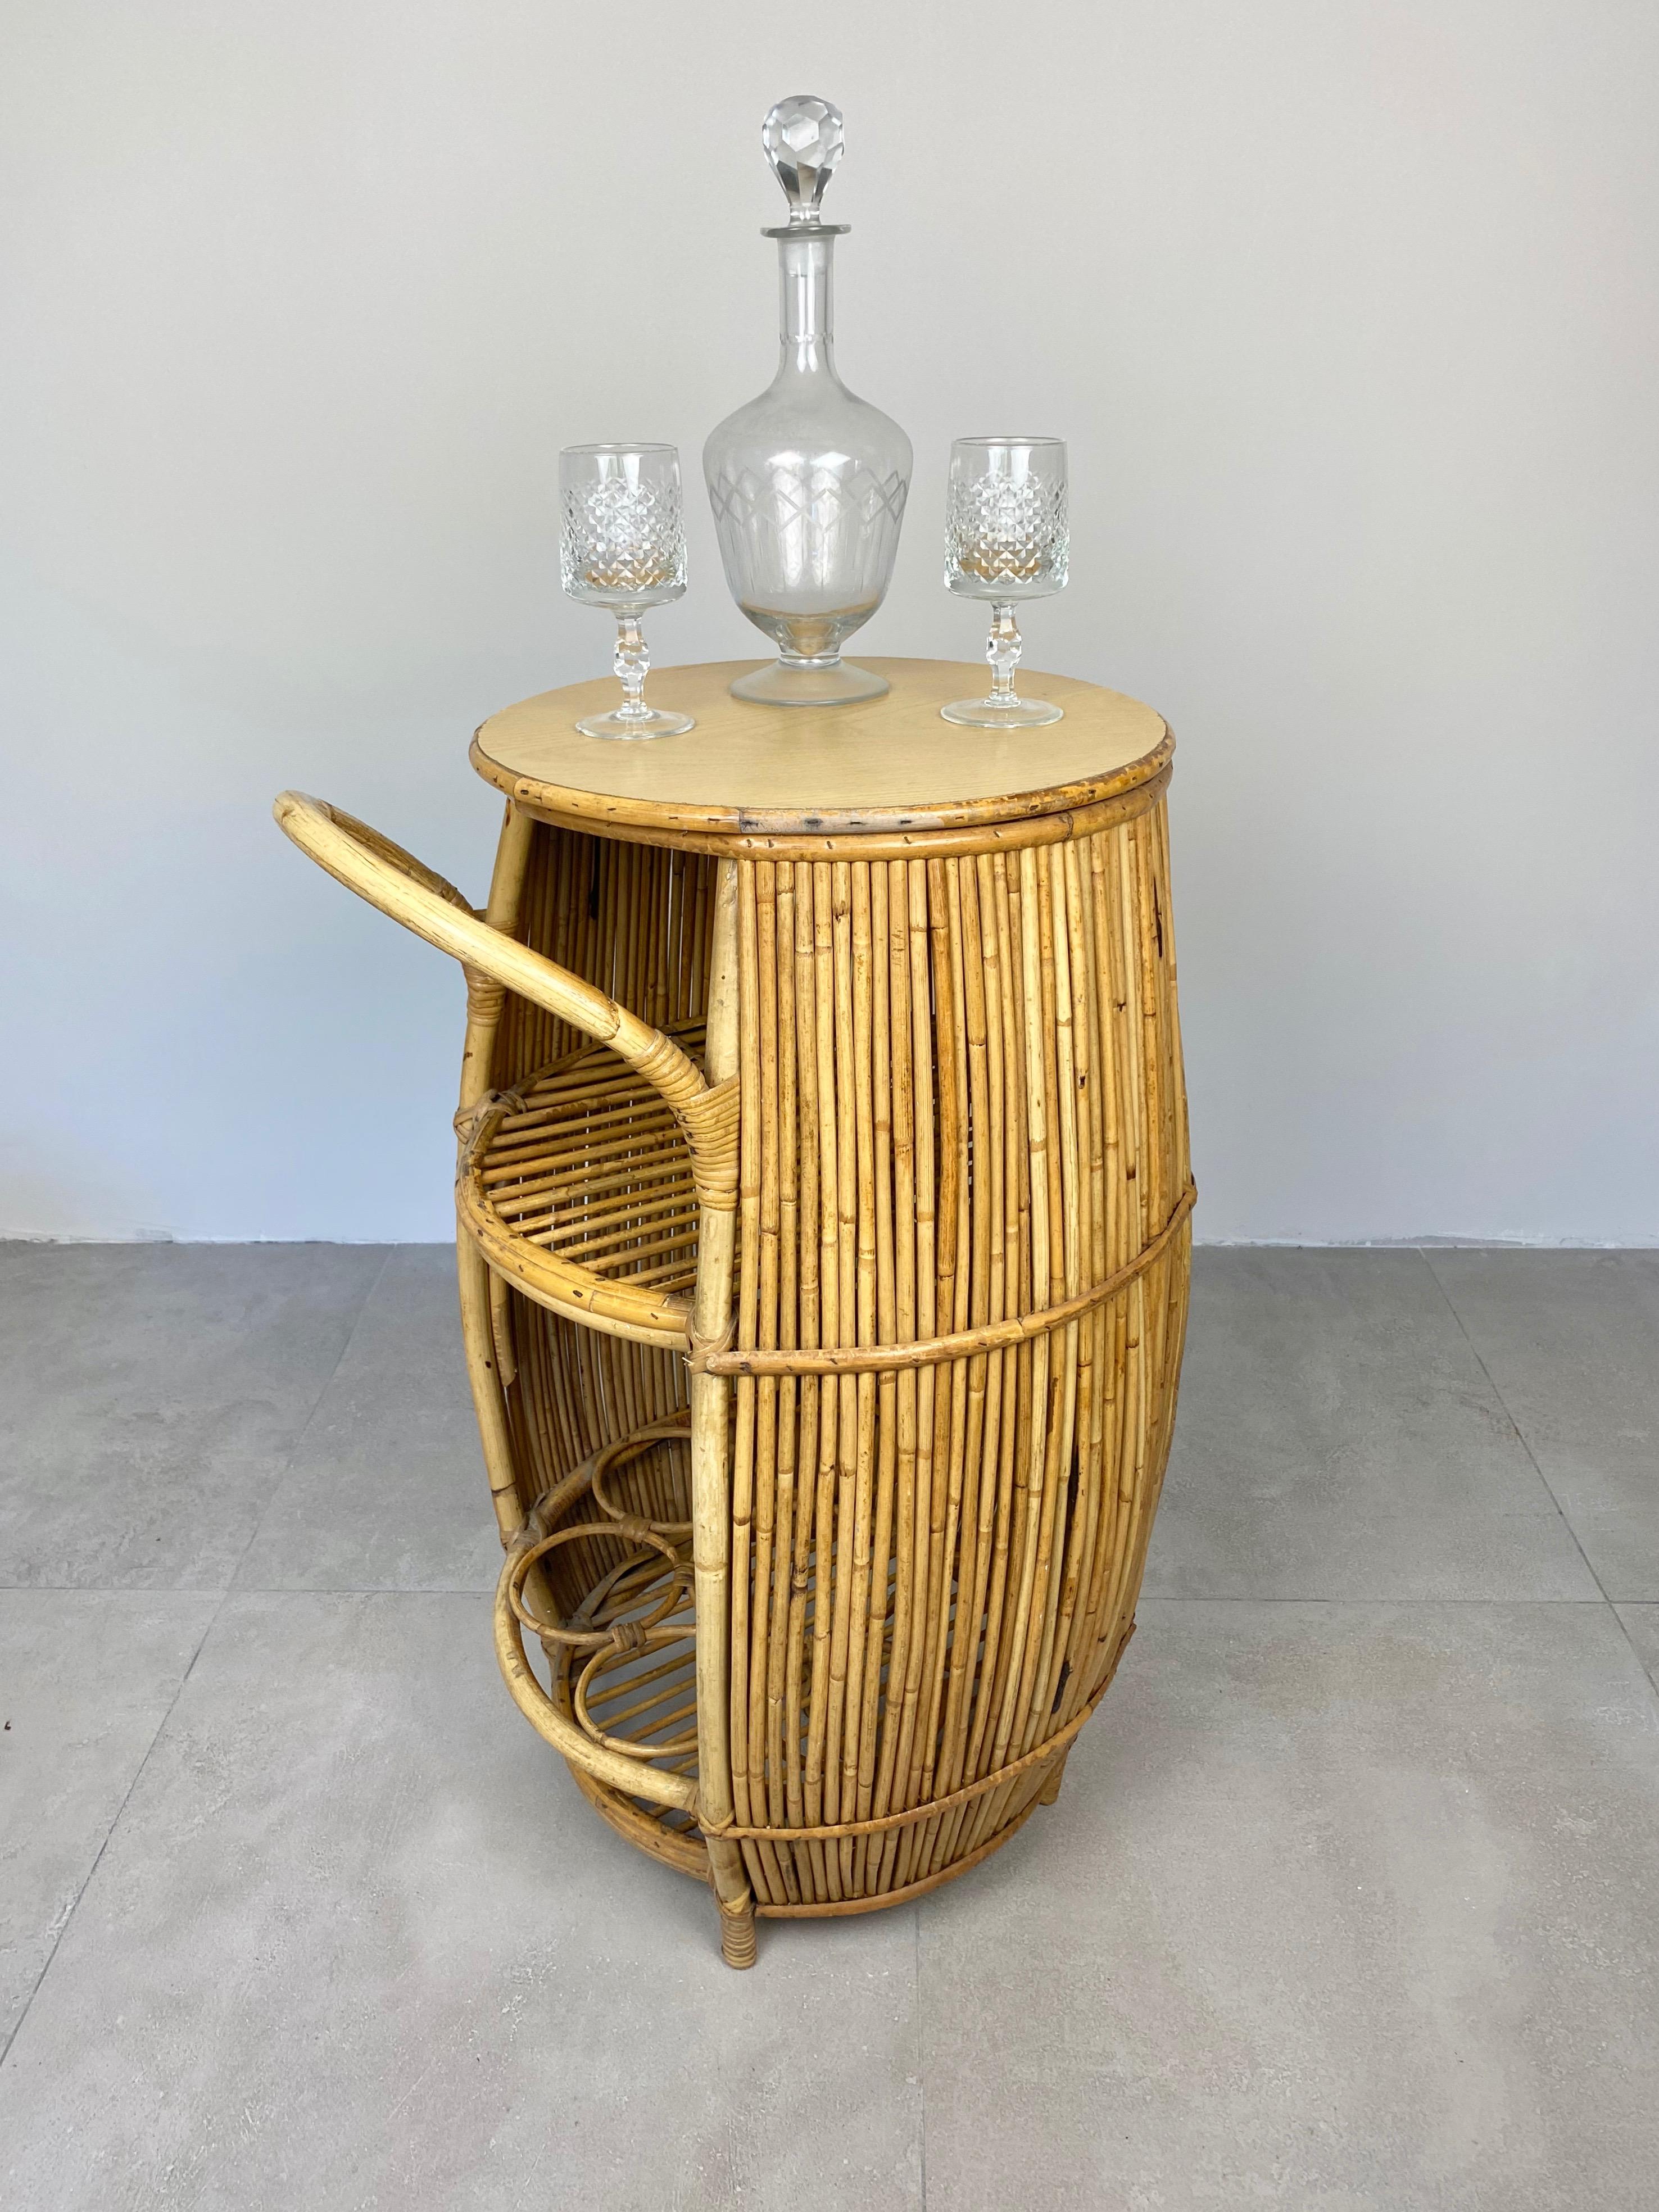 Mid-20th Century Bamboo Rattan Barrel Bar Cart Cabinet, Italy, 1960s For Sale